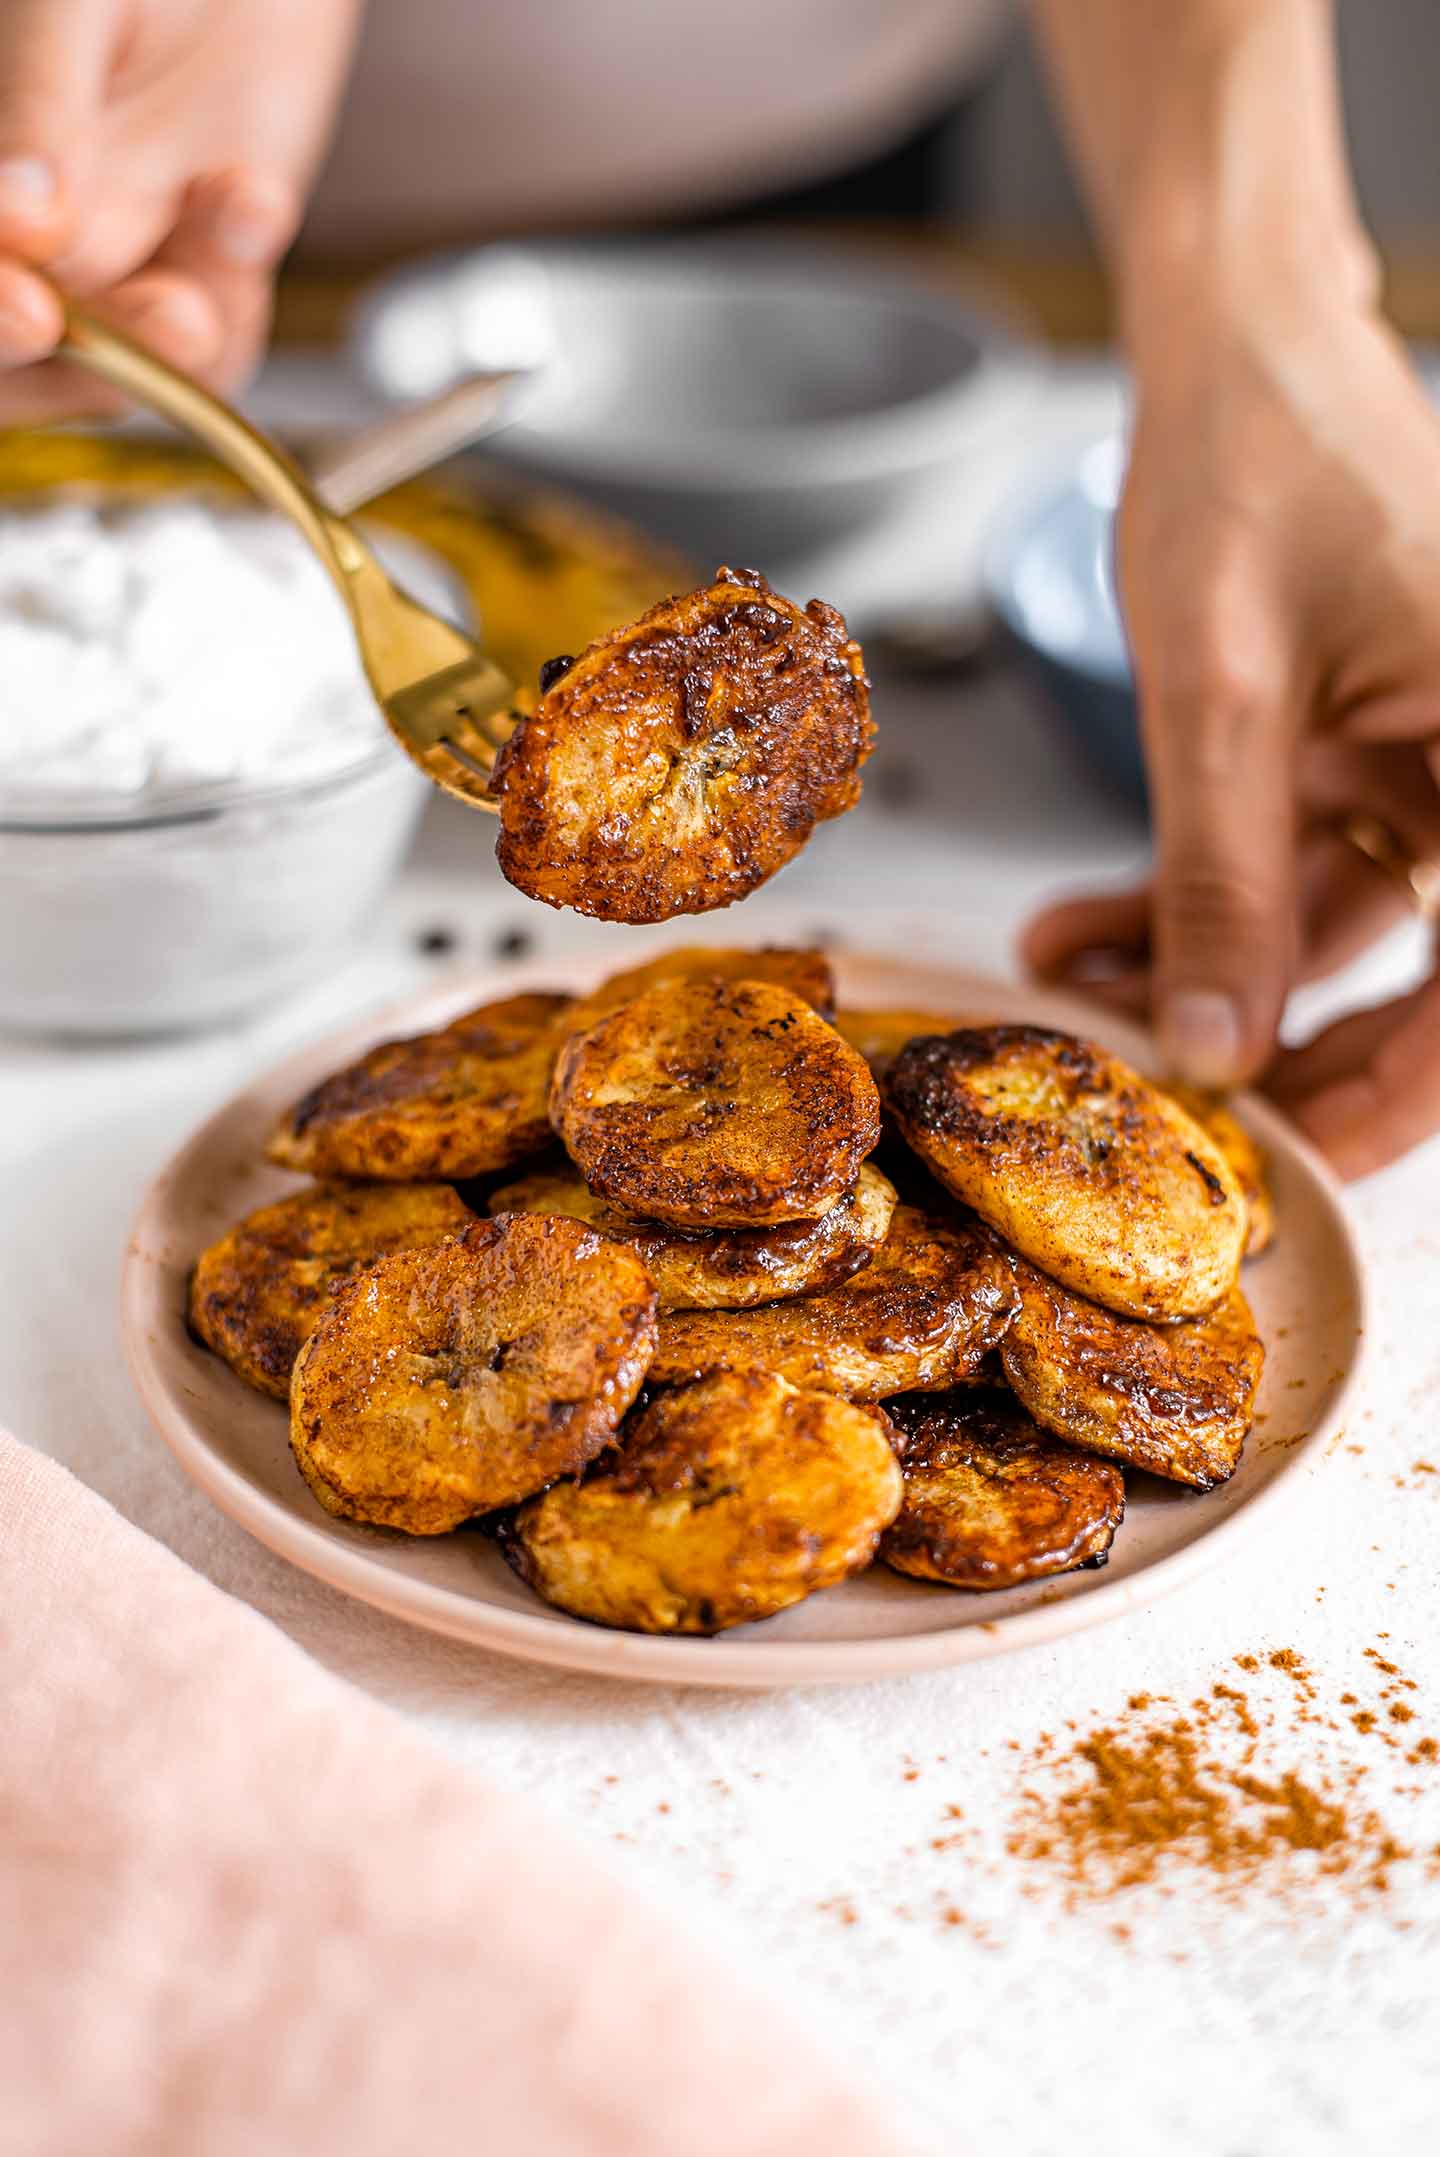 Side view of a plate of caramelized plantains. One golden piece is lifted above the plate on a fork.